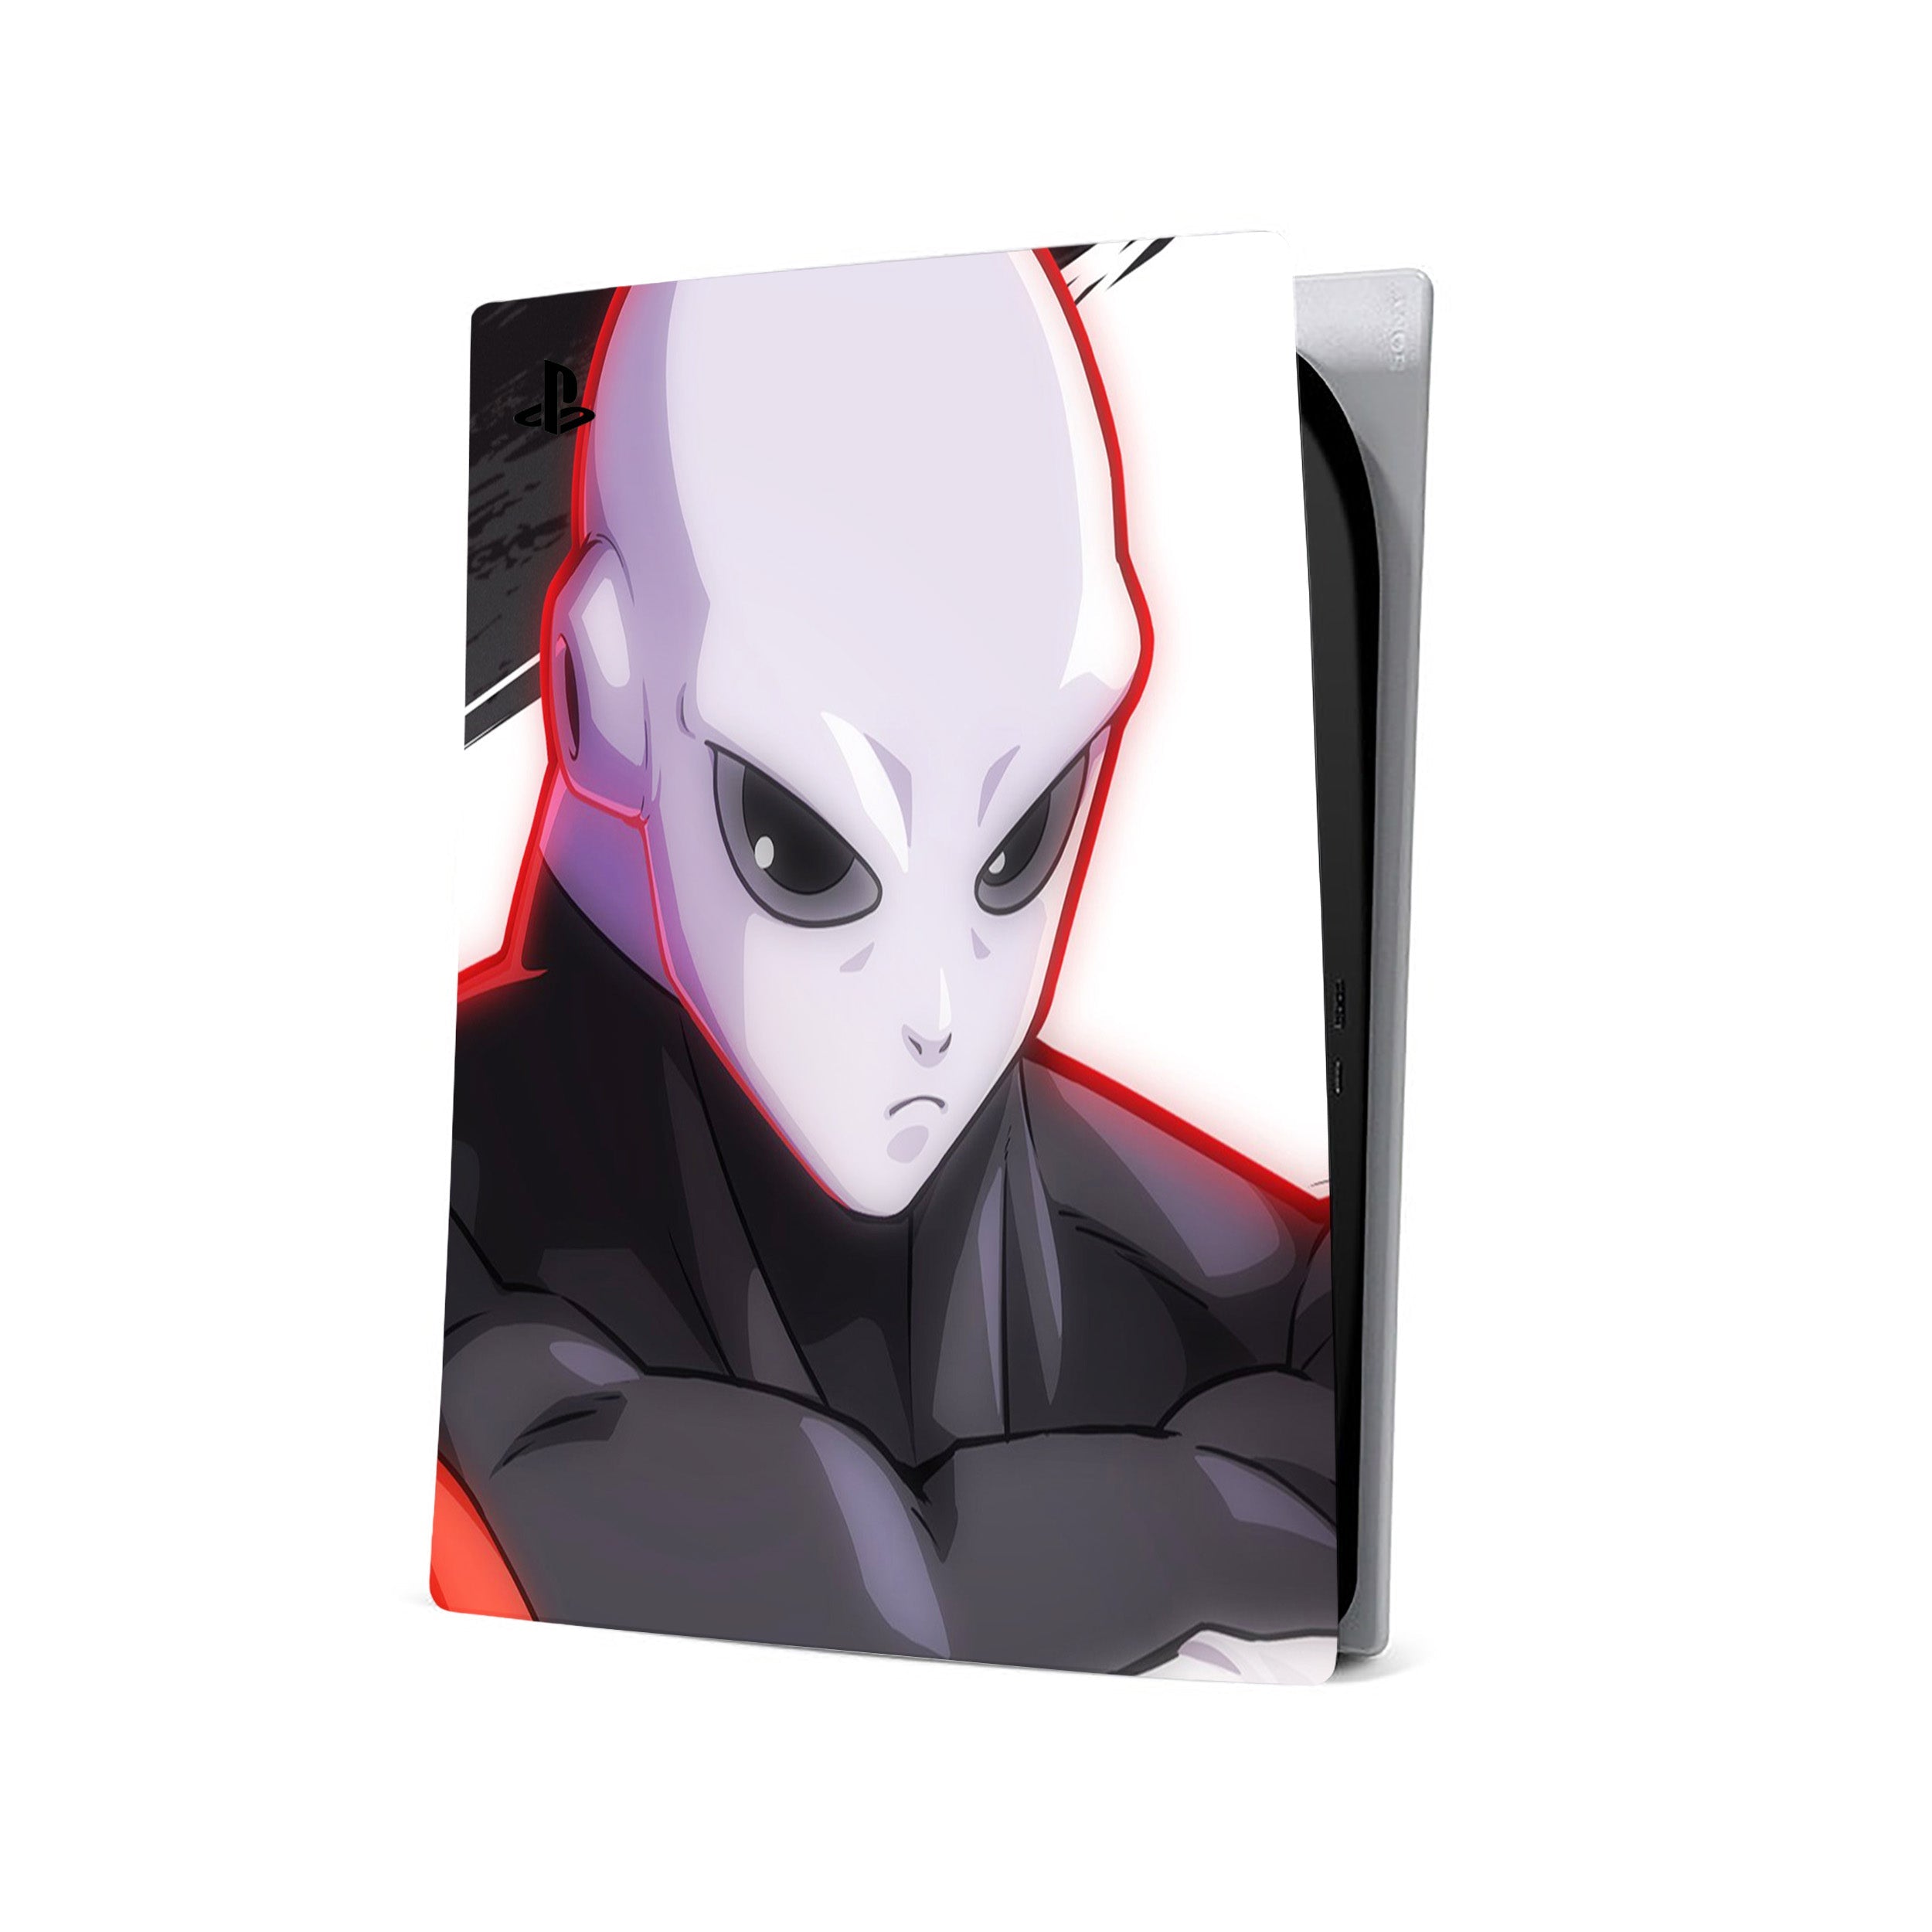 A video game skin featuring a Dragon Ball Fighterz Jiren design for the PS5.